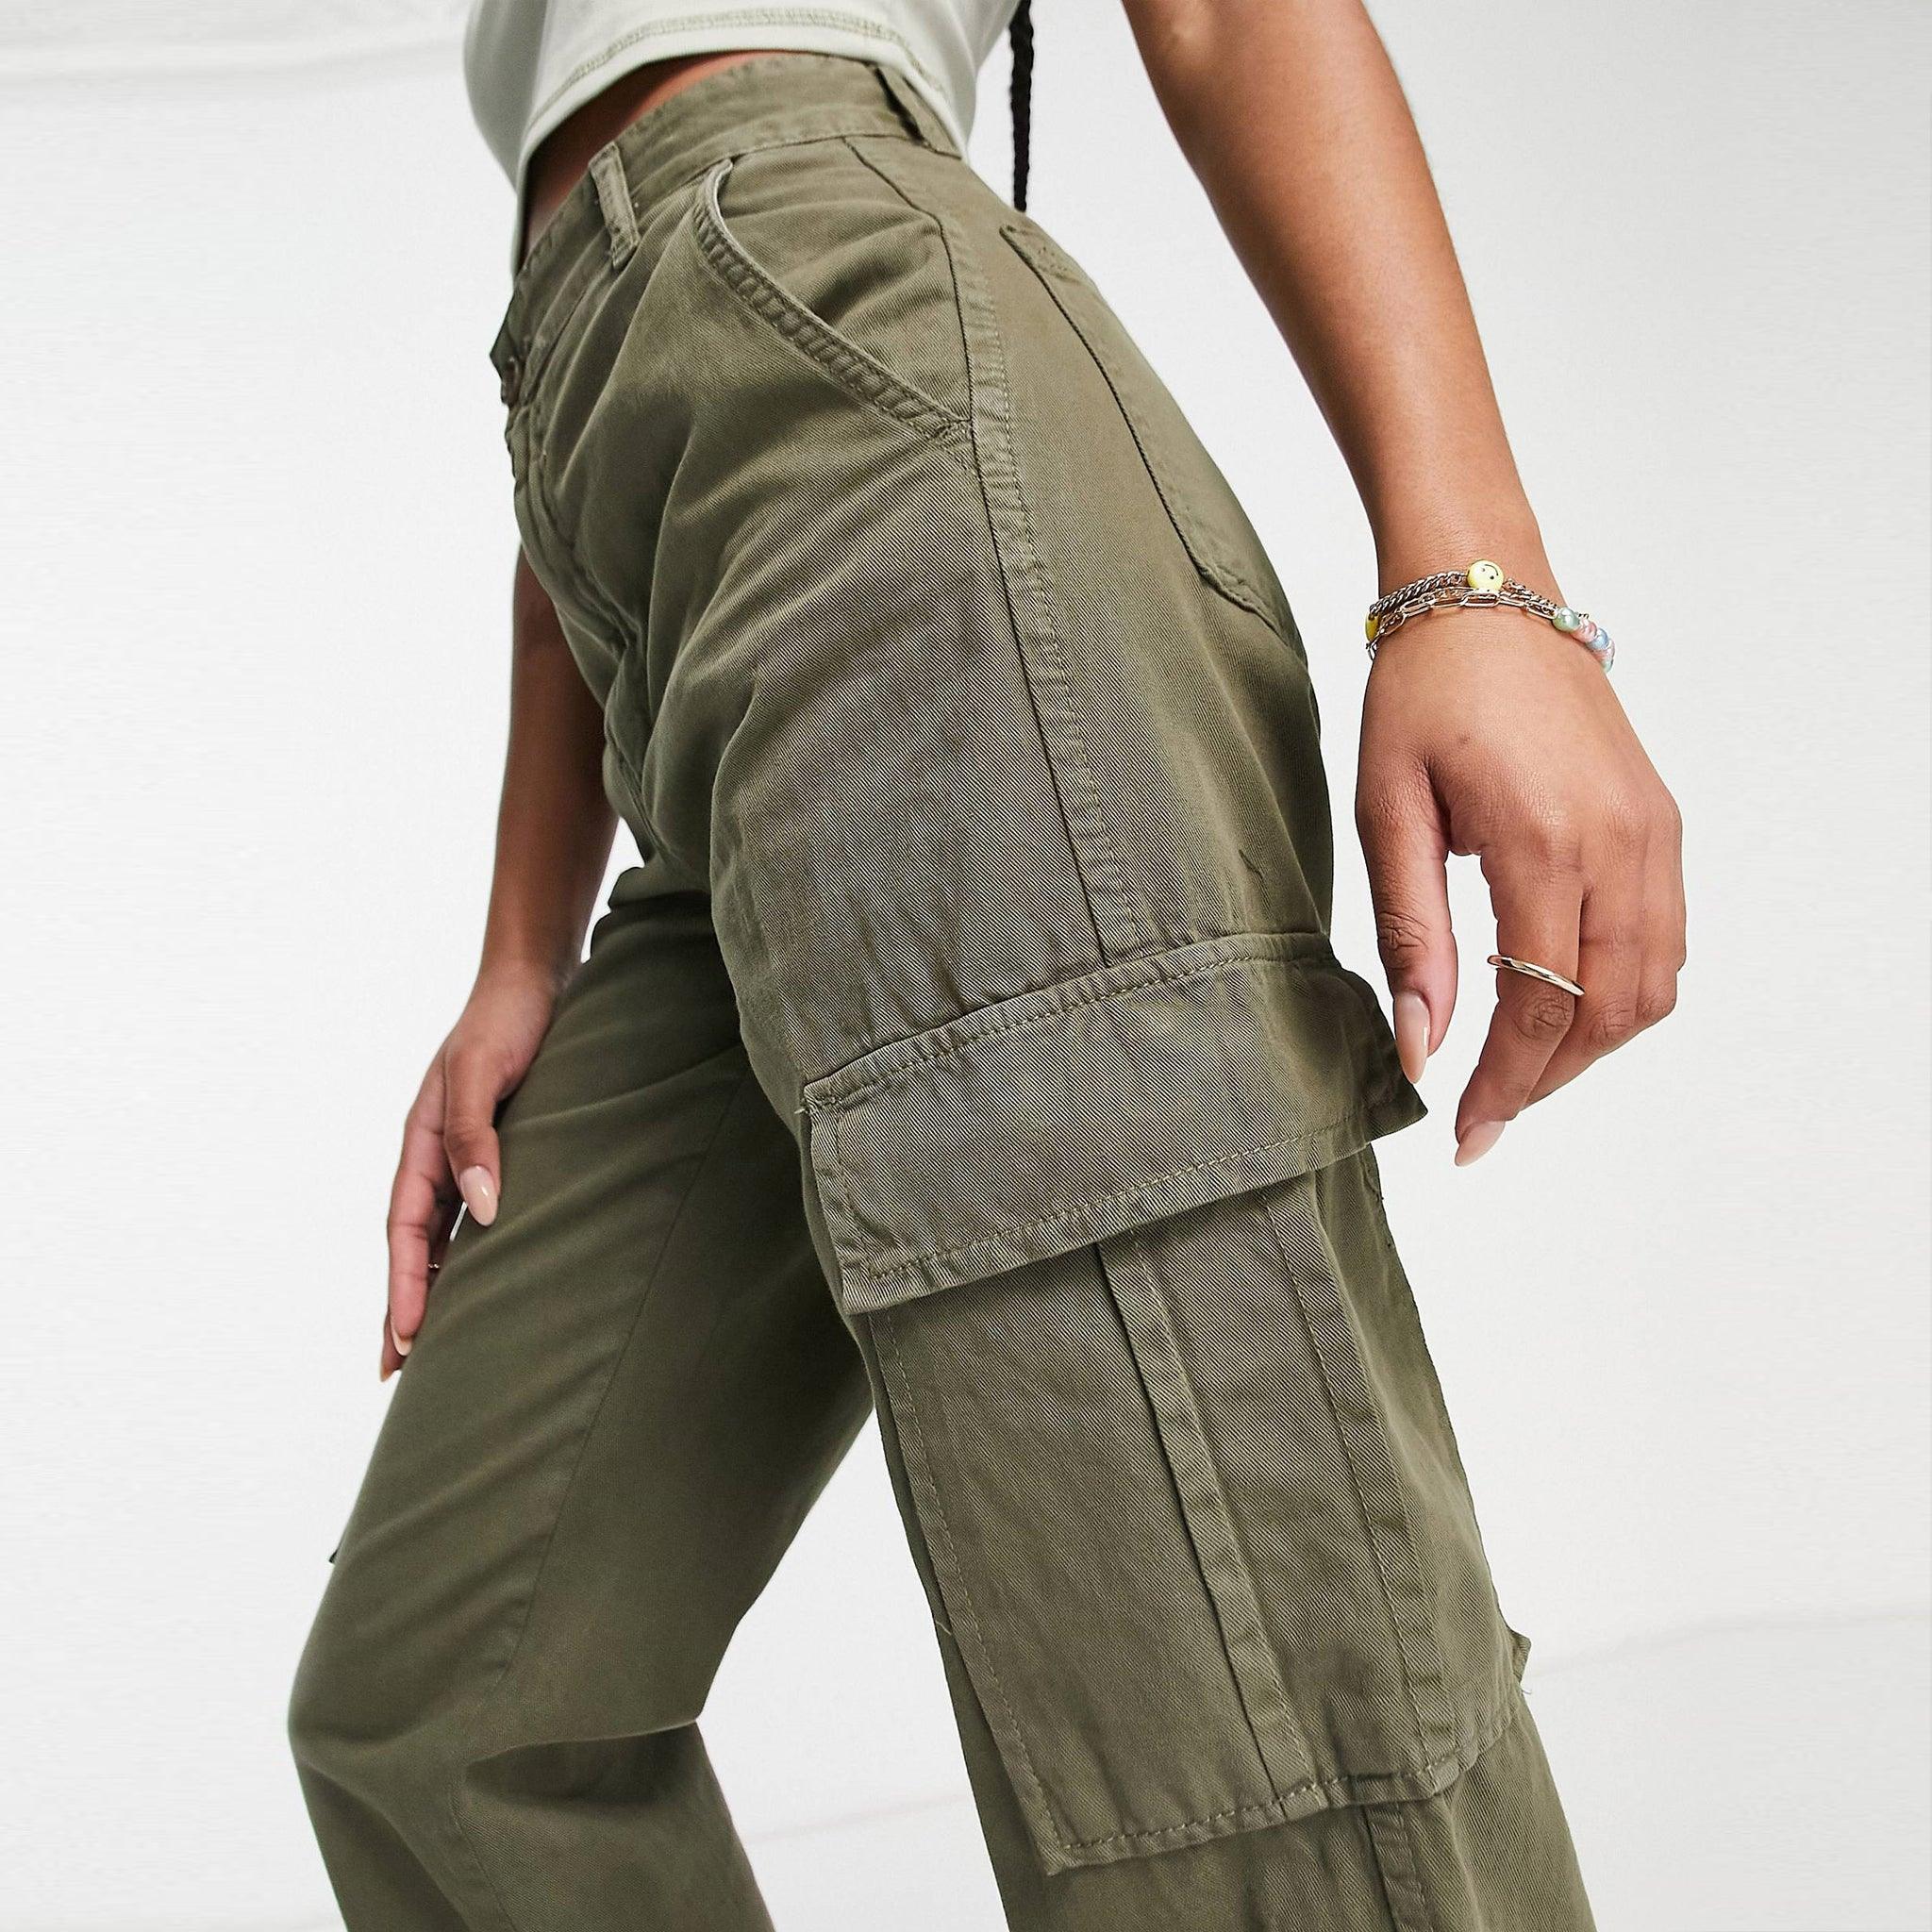 Solid Women Olive Green Cargo Pant, Slim Fit at Rs 330/piece in New Delhi |  ID: 25918155748